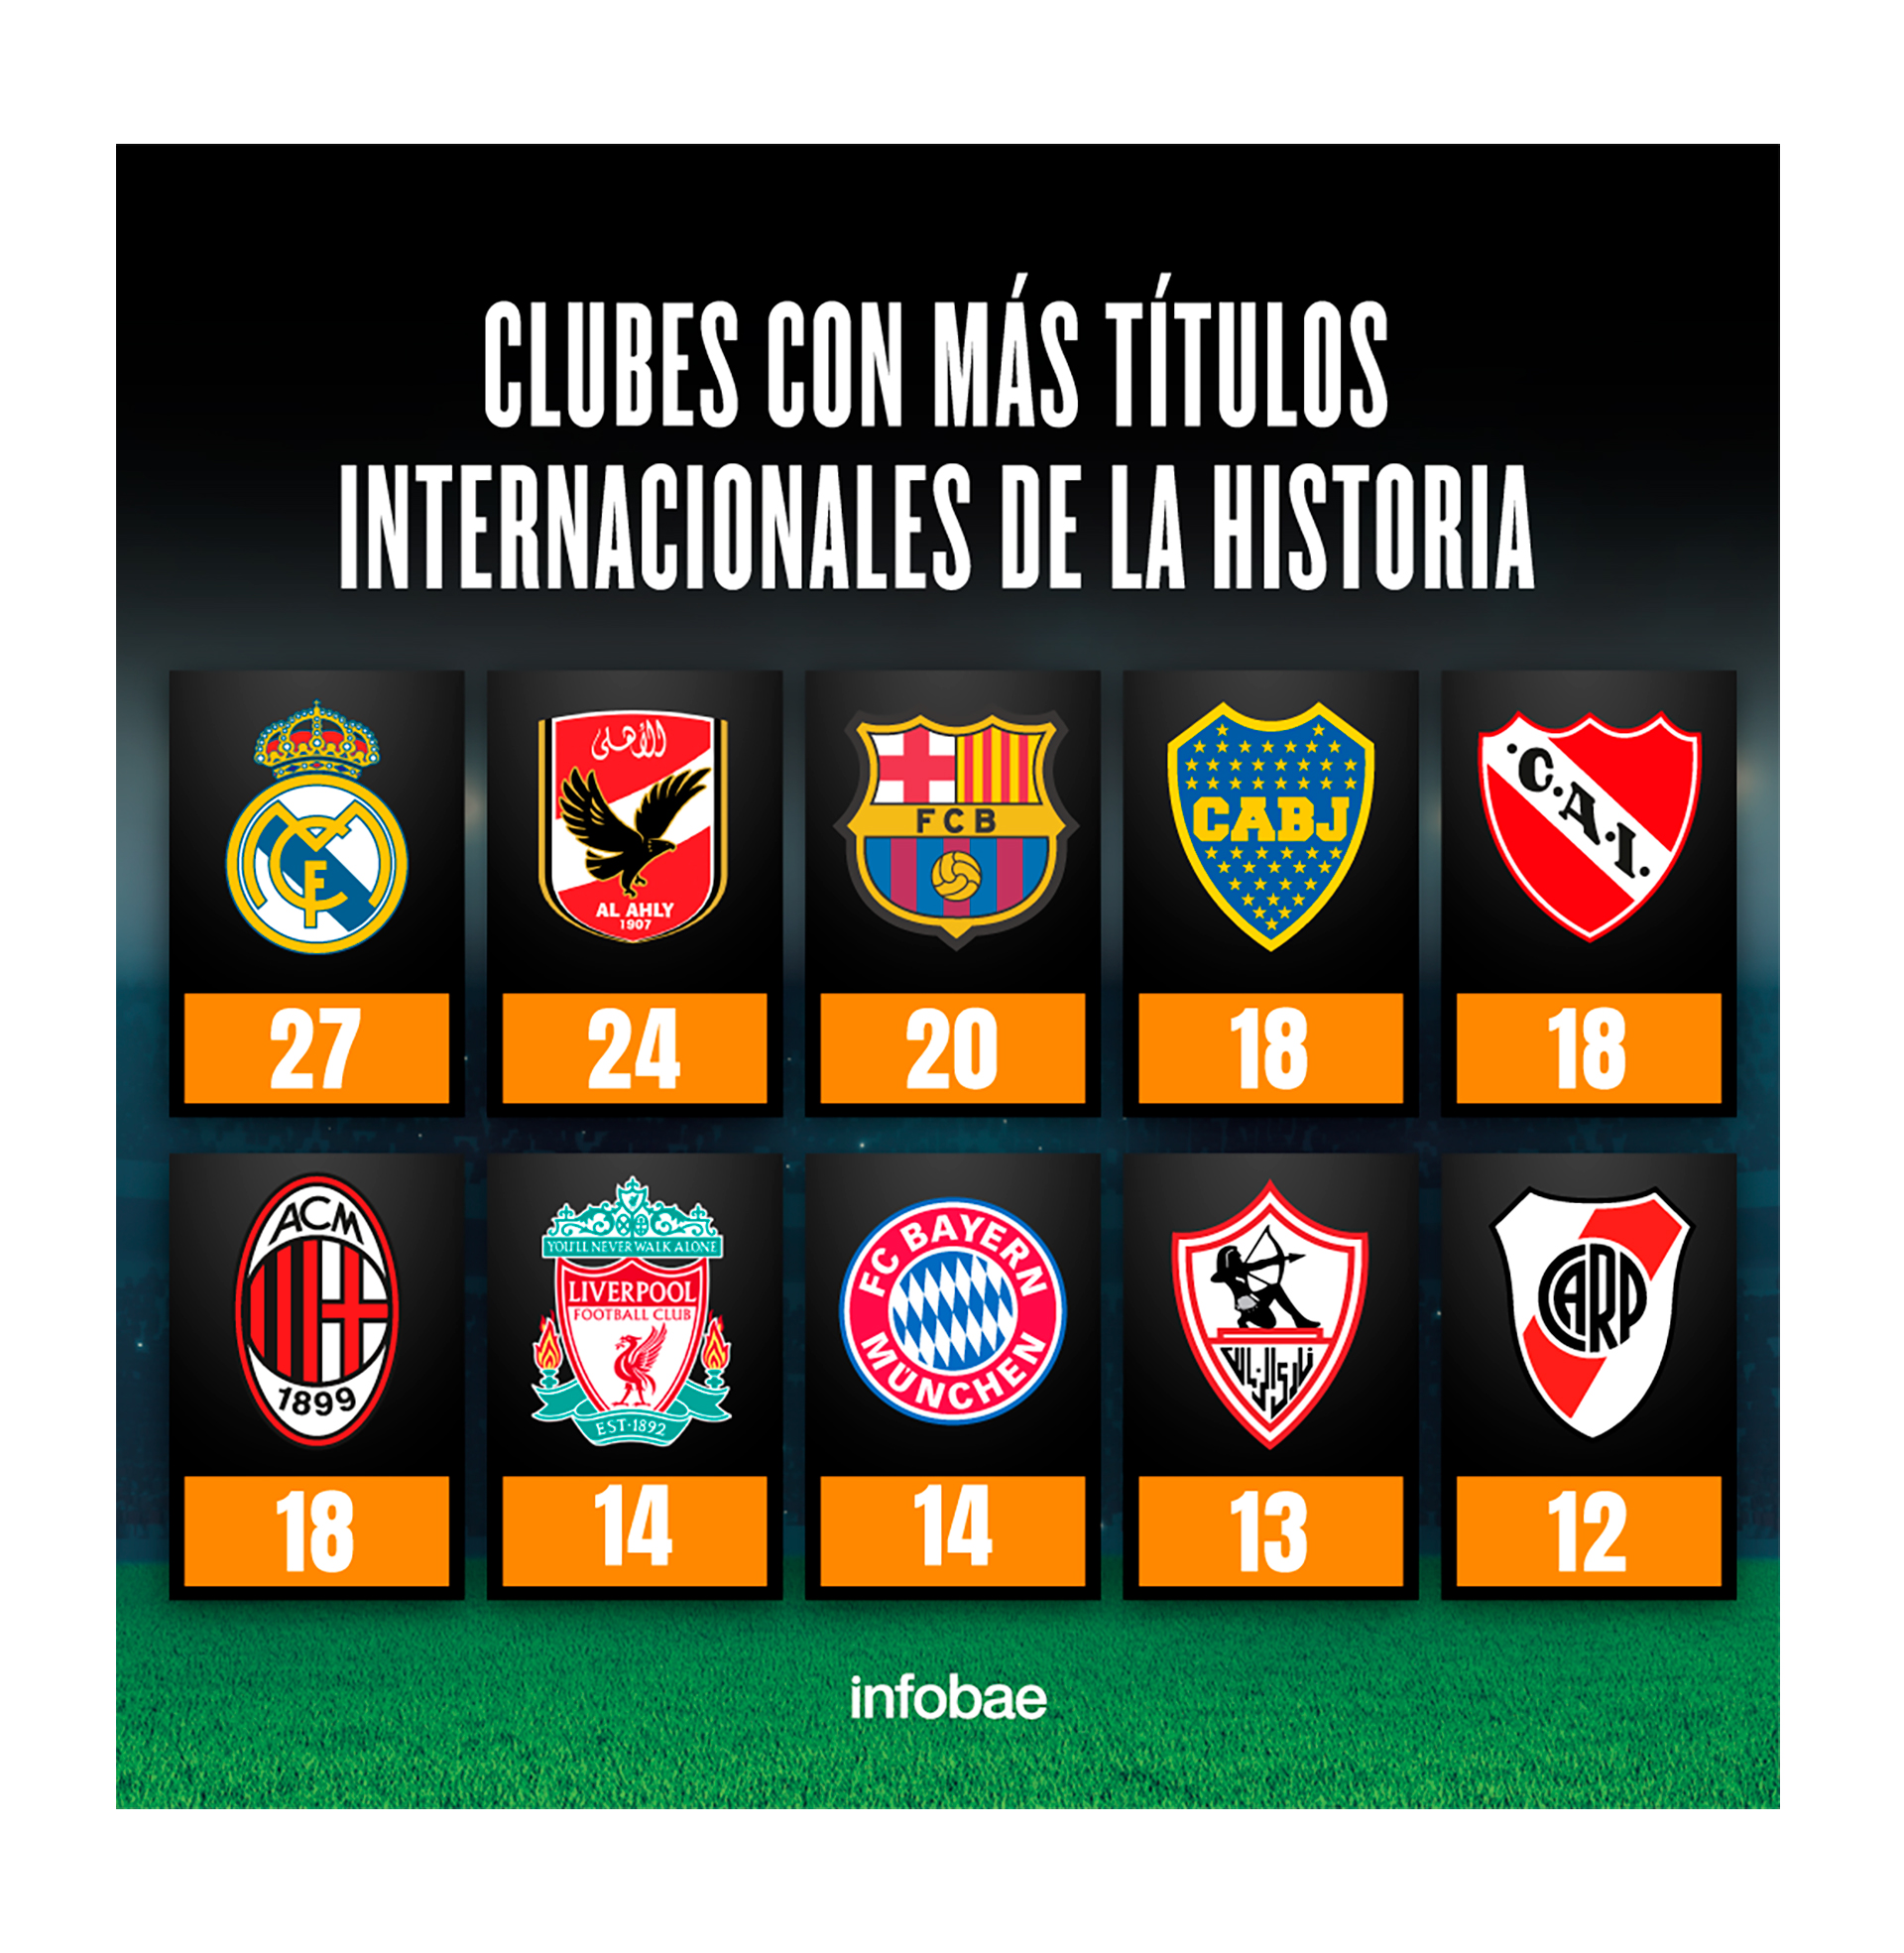 The clubs with the most international trophies